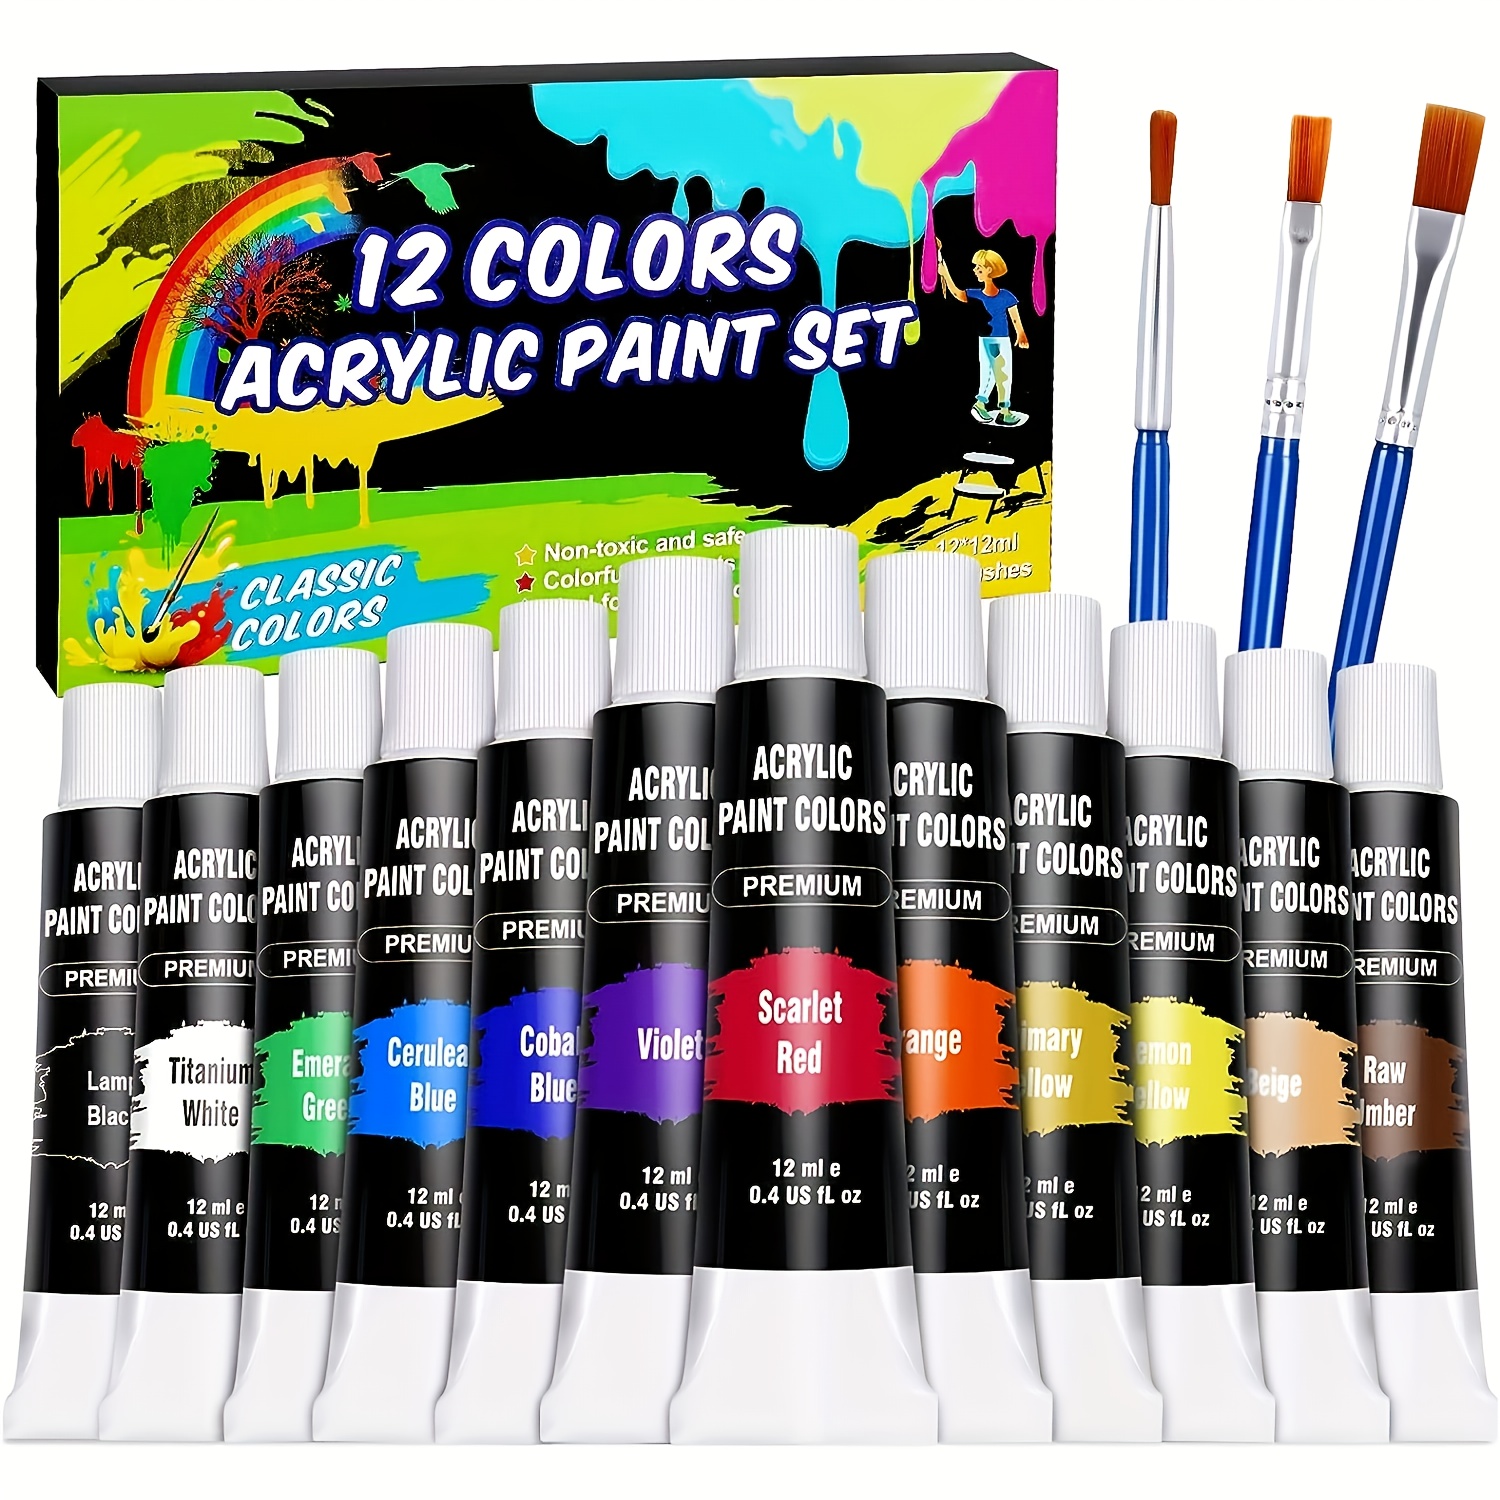 6/3/2pcs Acrylic Paint, Metallic Glitter Paint For Silk Screen  Stencils,non-toxic, Non-fading, 1.69oz Paint For Art, Painting, Handcrafts,  Ideal For Canvas Wood Clay Fabric Ceramic Craft Supplies - Arts, Crafts &  Sewing 